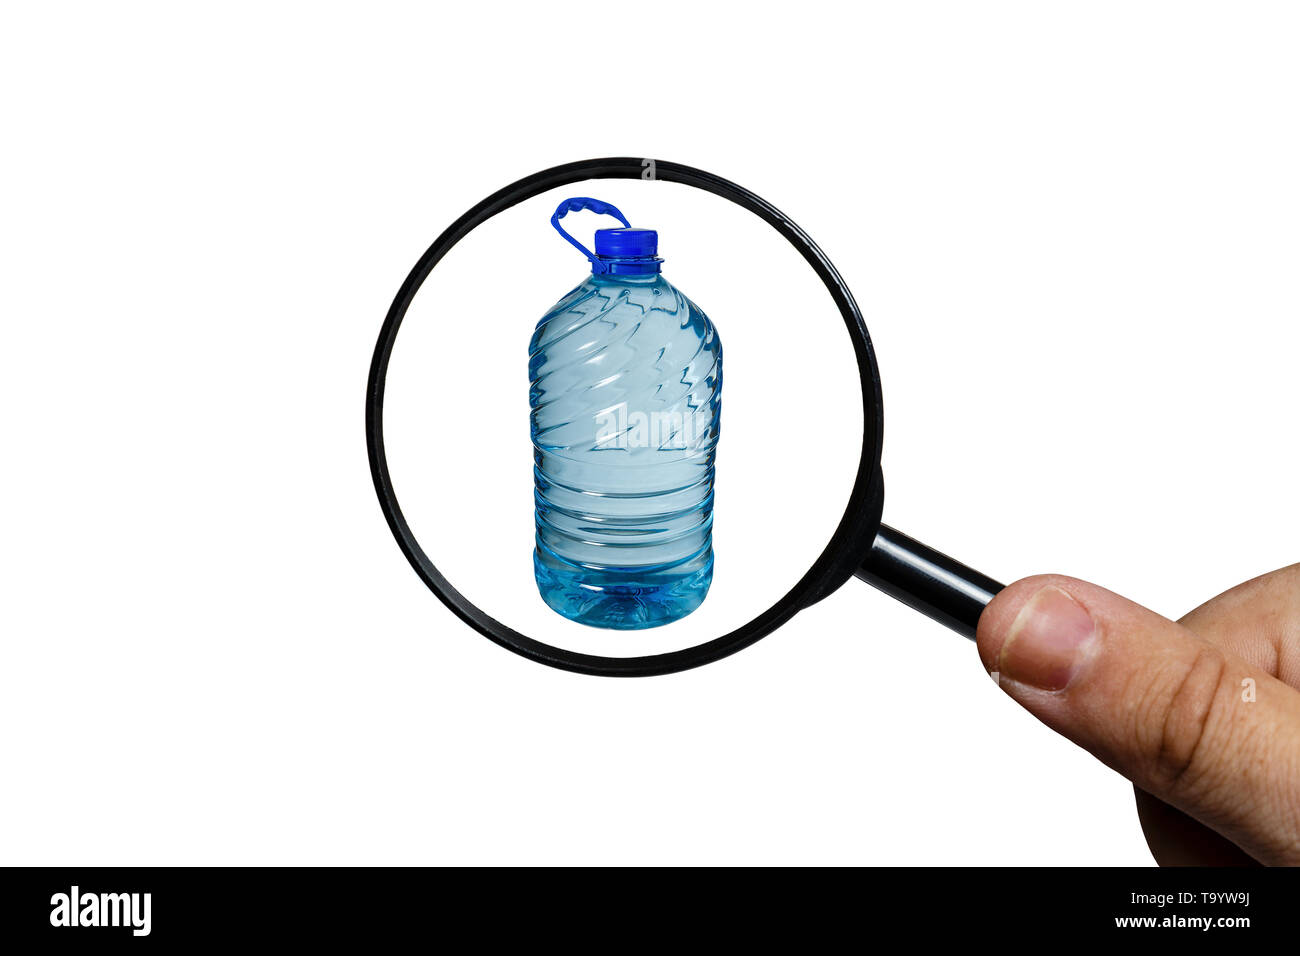 Big bottle of water isolated on a white background, view through a magnifying glass, magnifying glass in hand Stock Photo